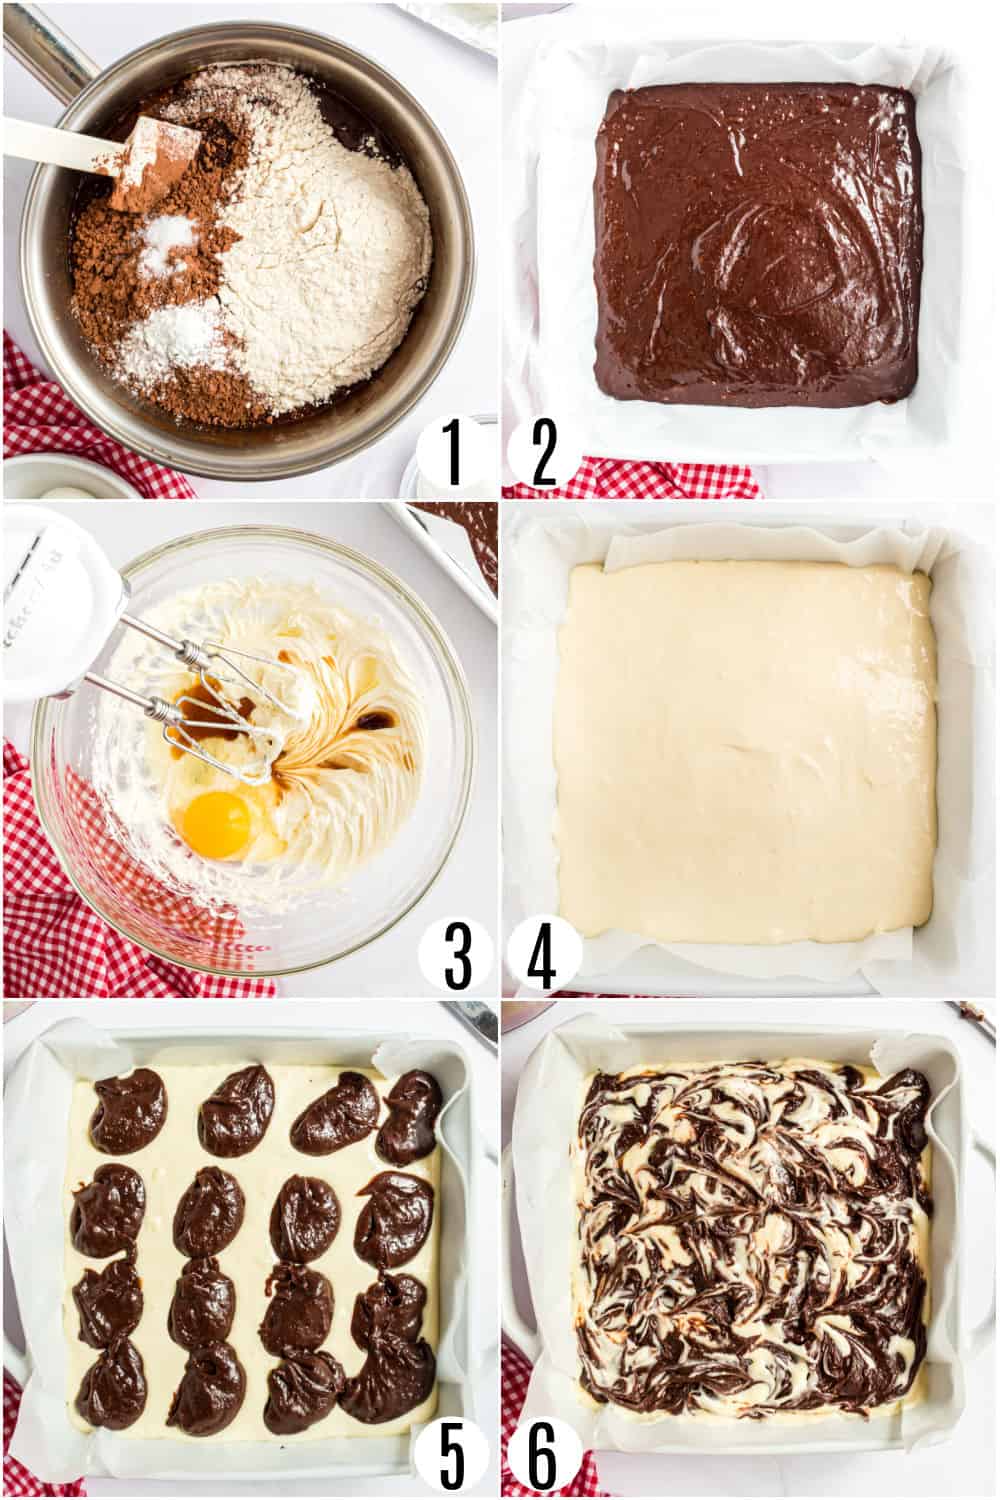 Step by step photos showing how to make cream cheese swirled brownies.